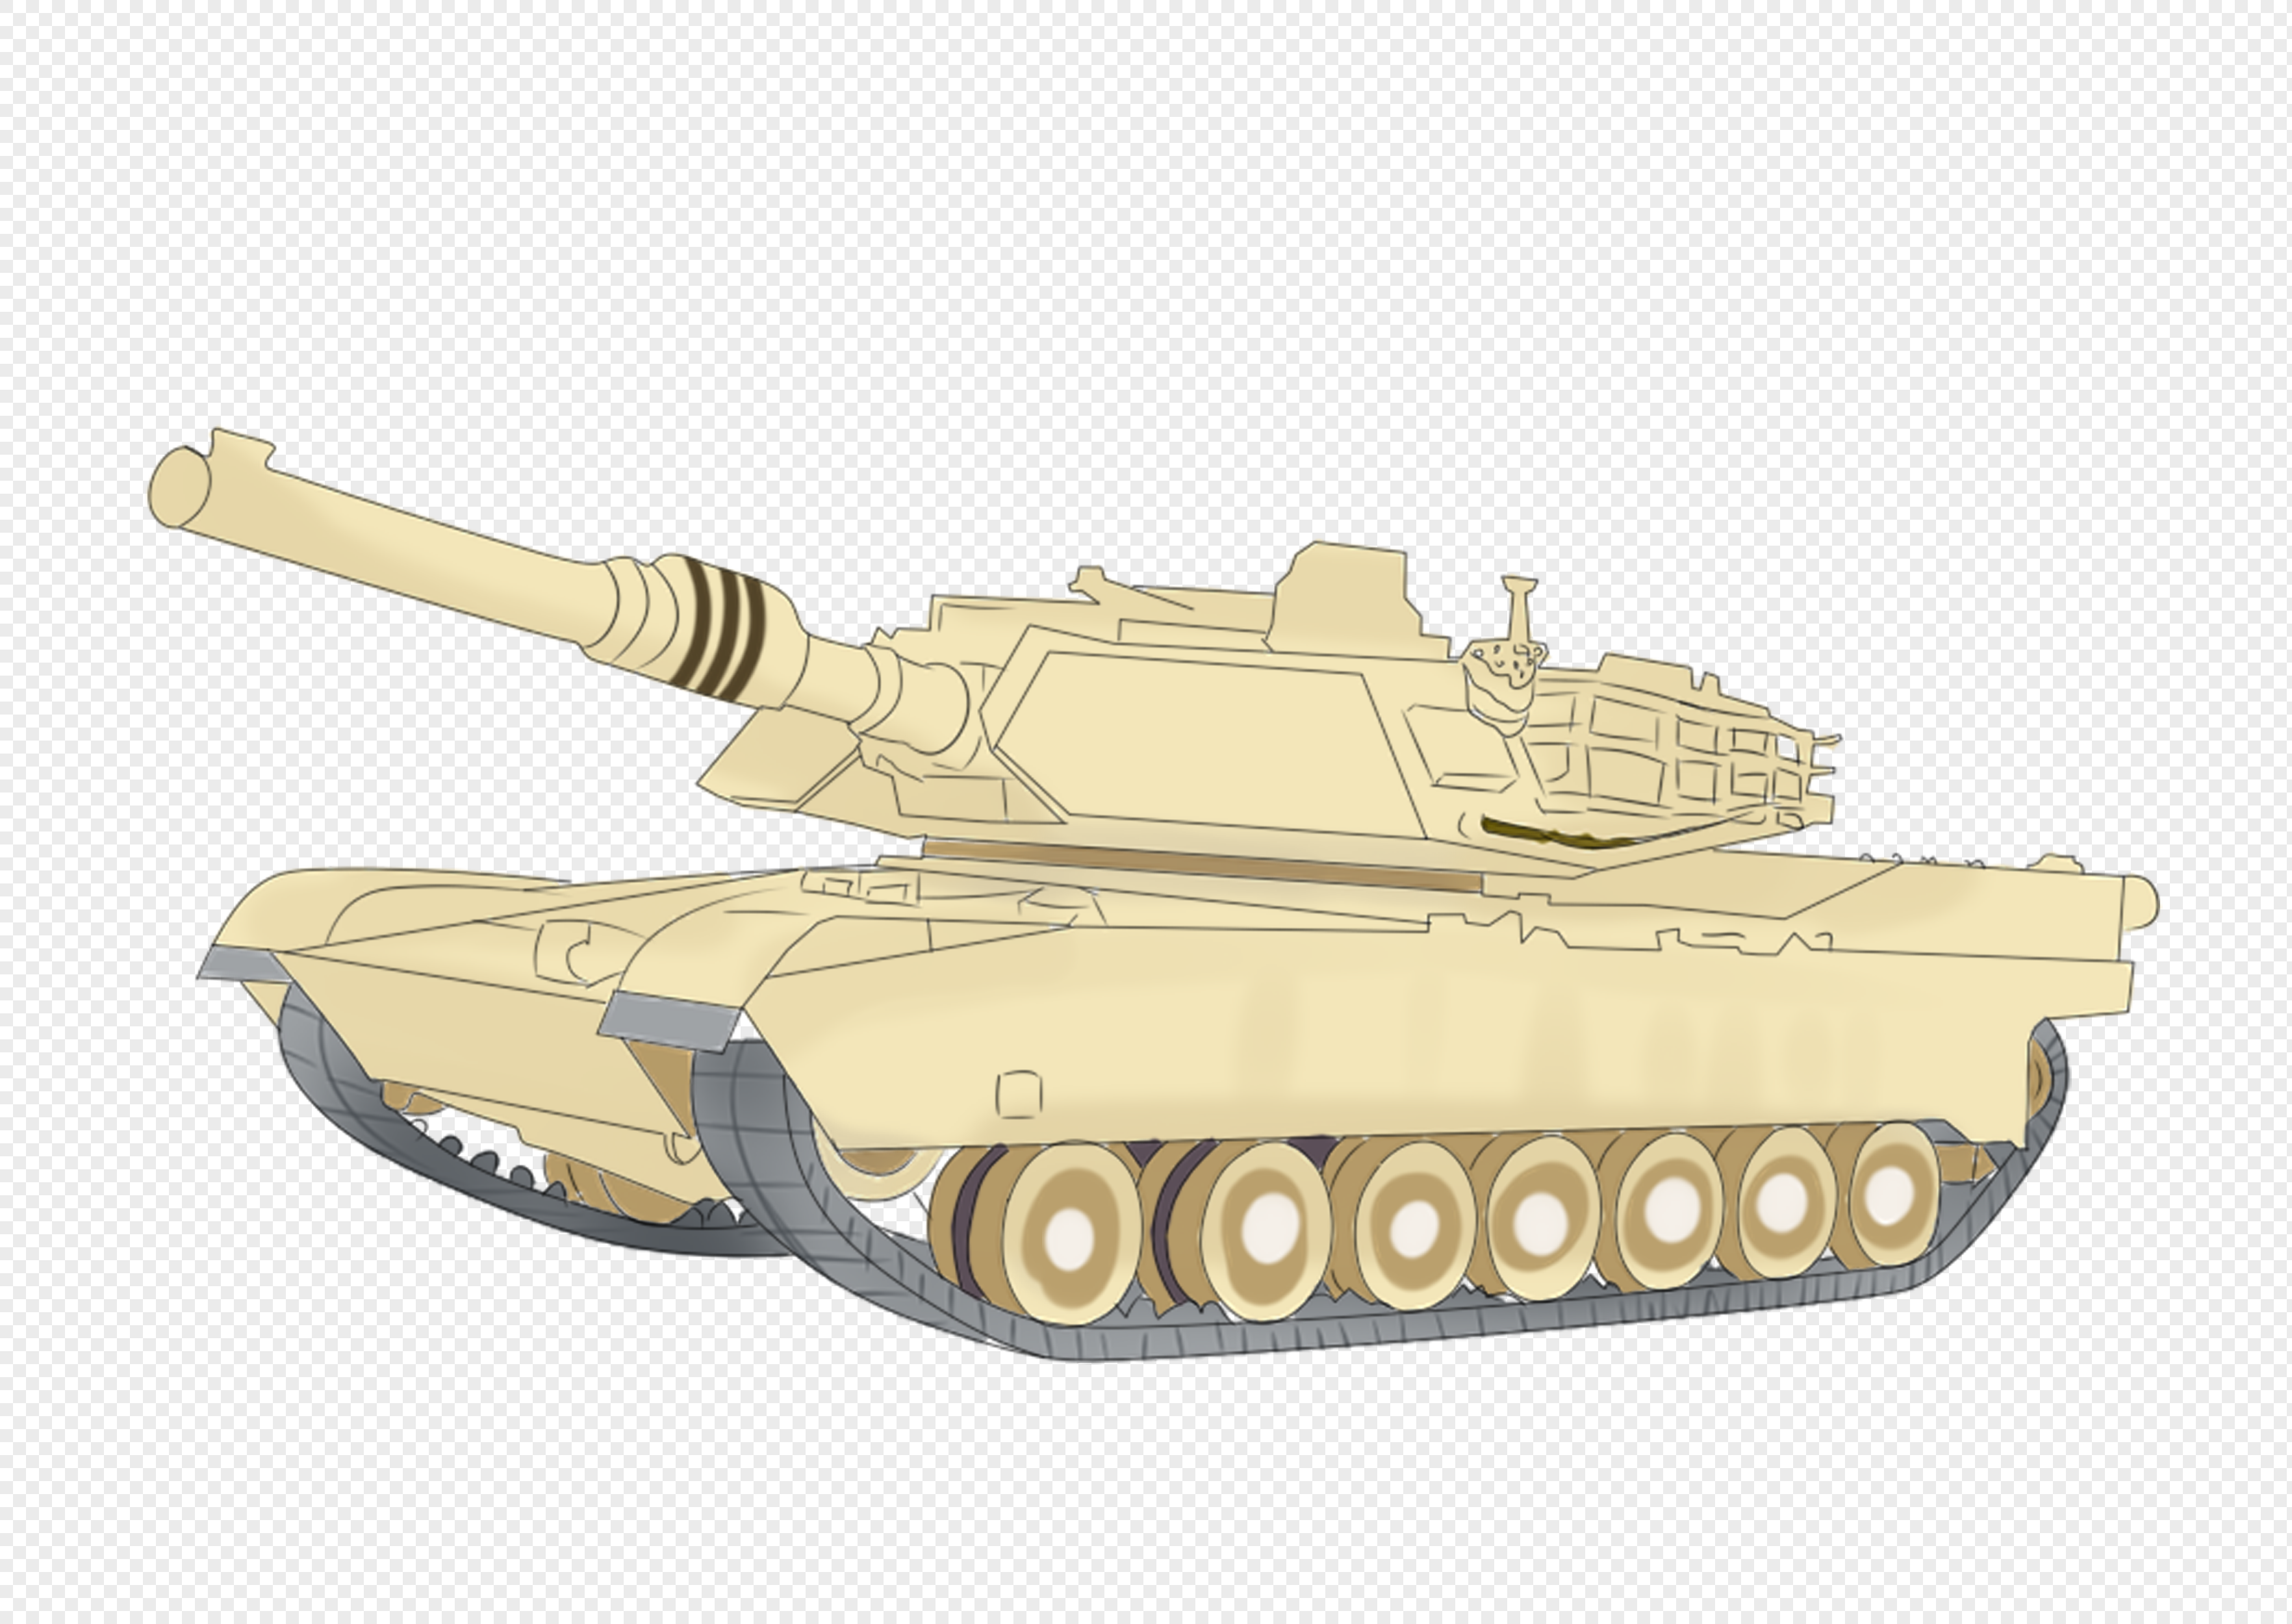 Military tank on transparent background PNG - Similar PNG